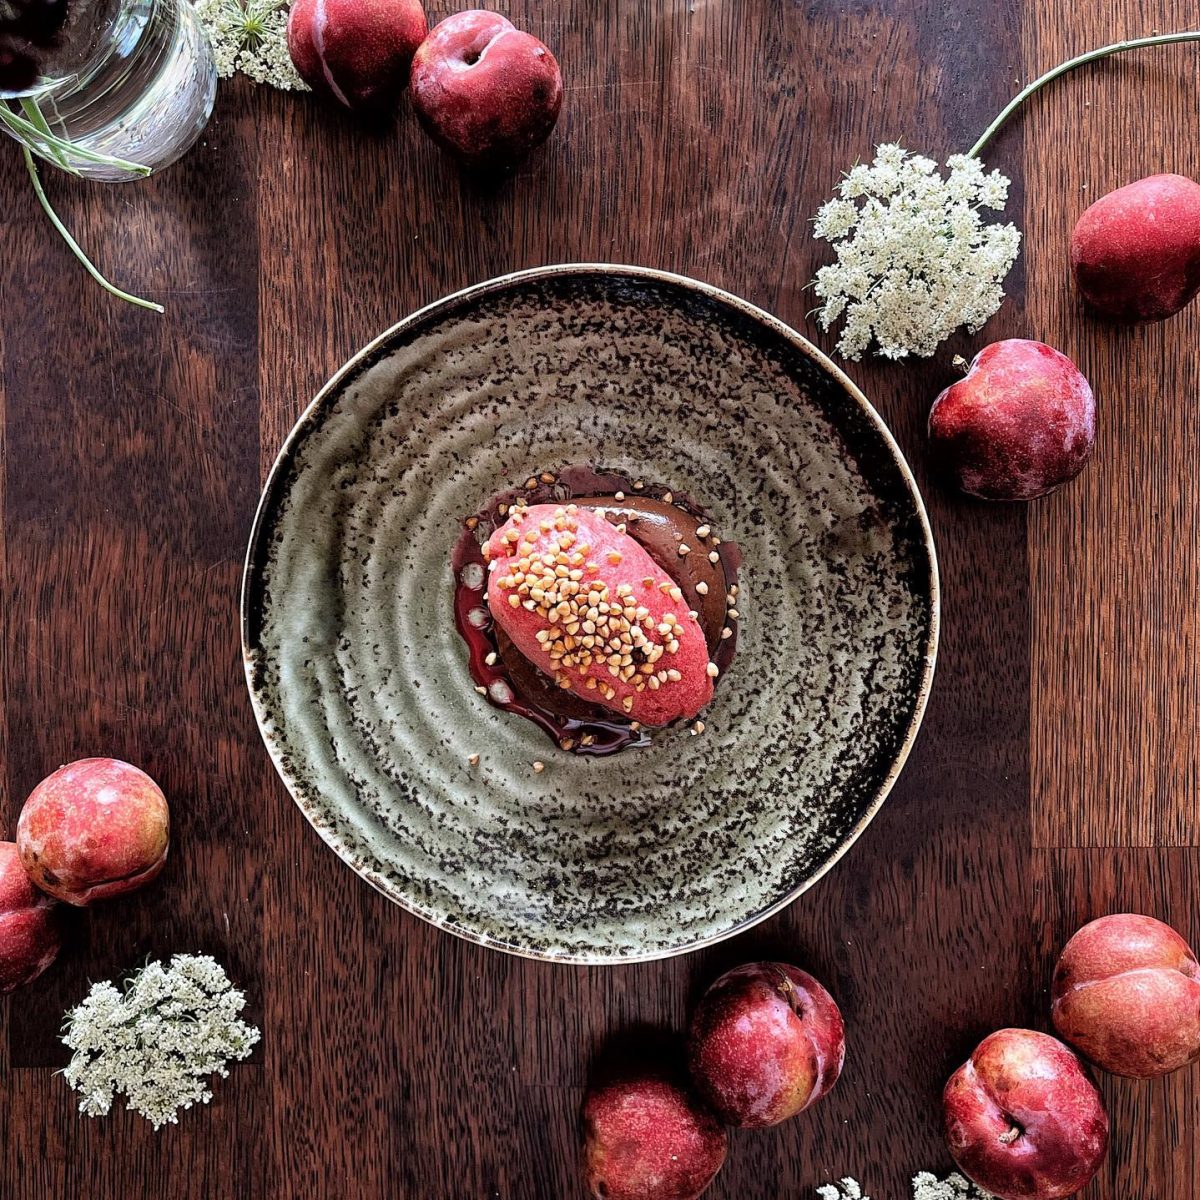 Plum sorbet on plate surrounded by plums.